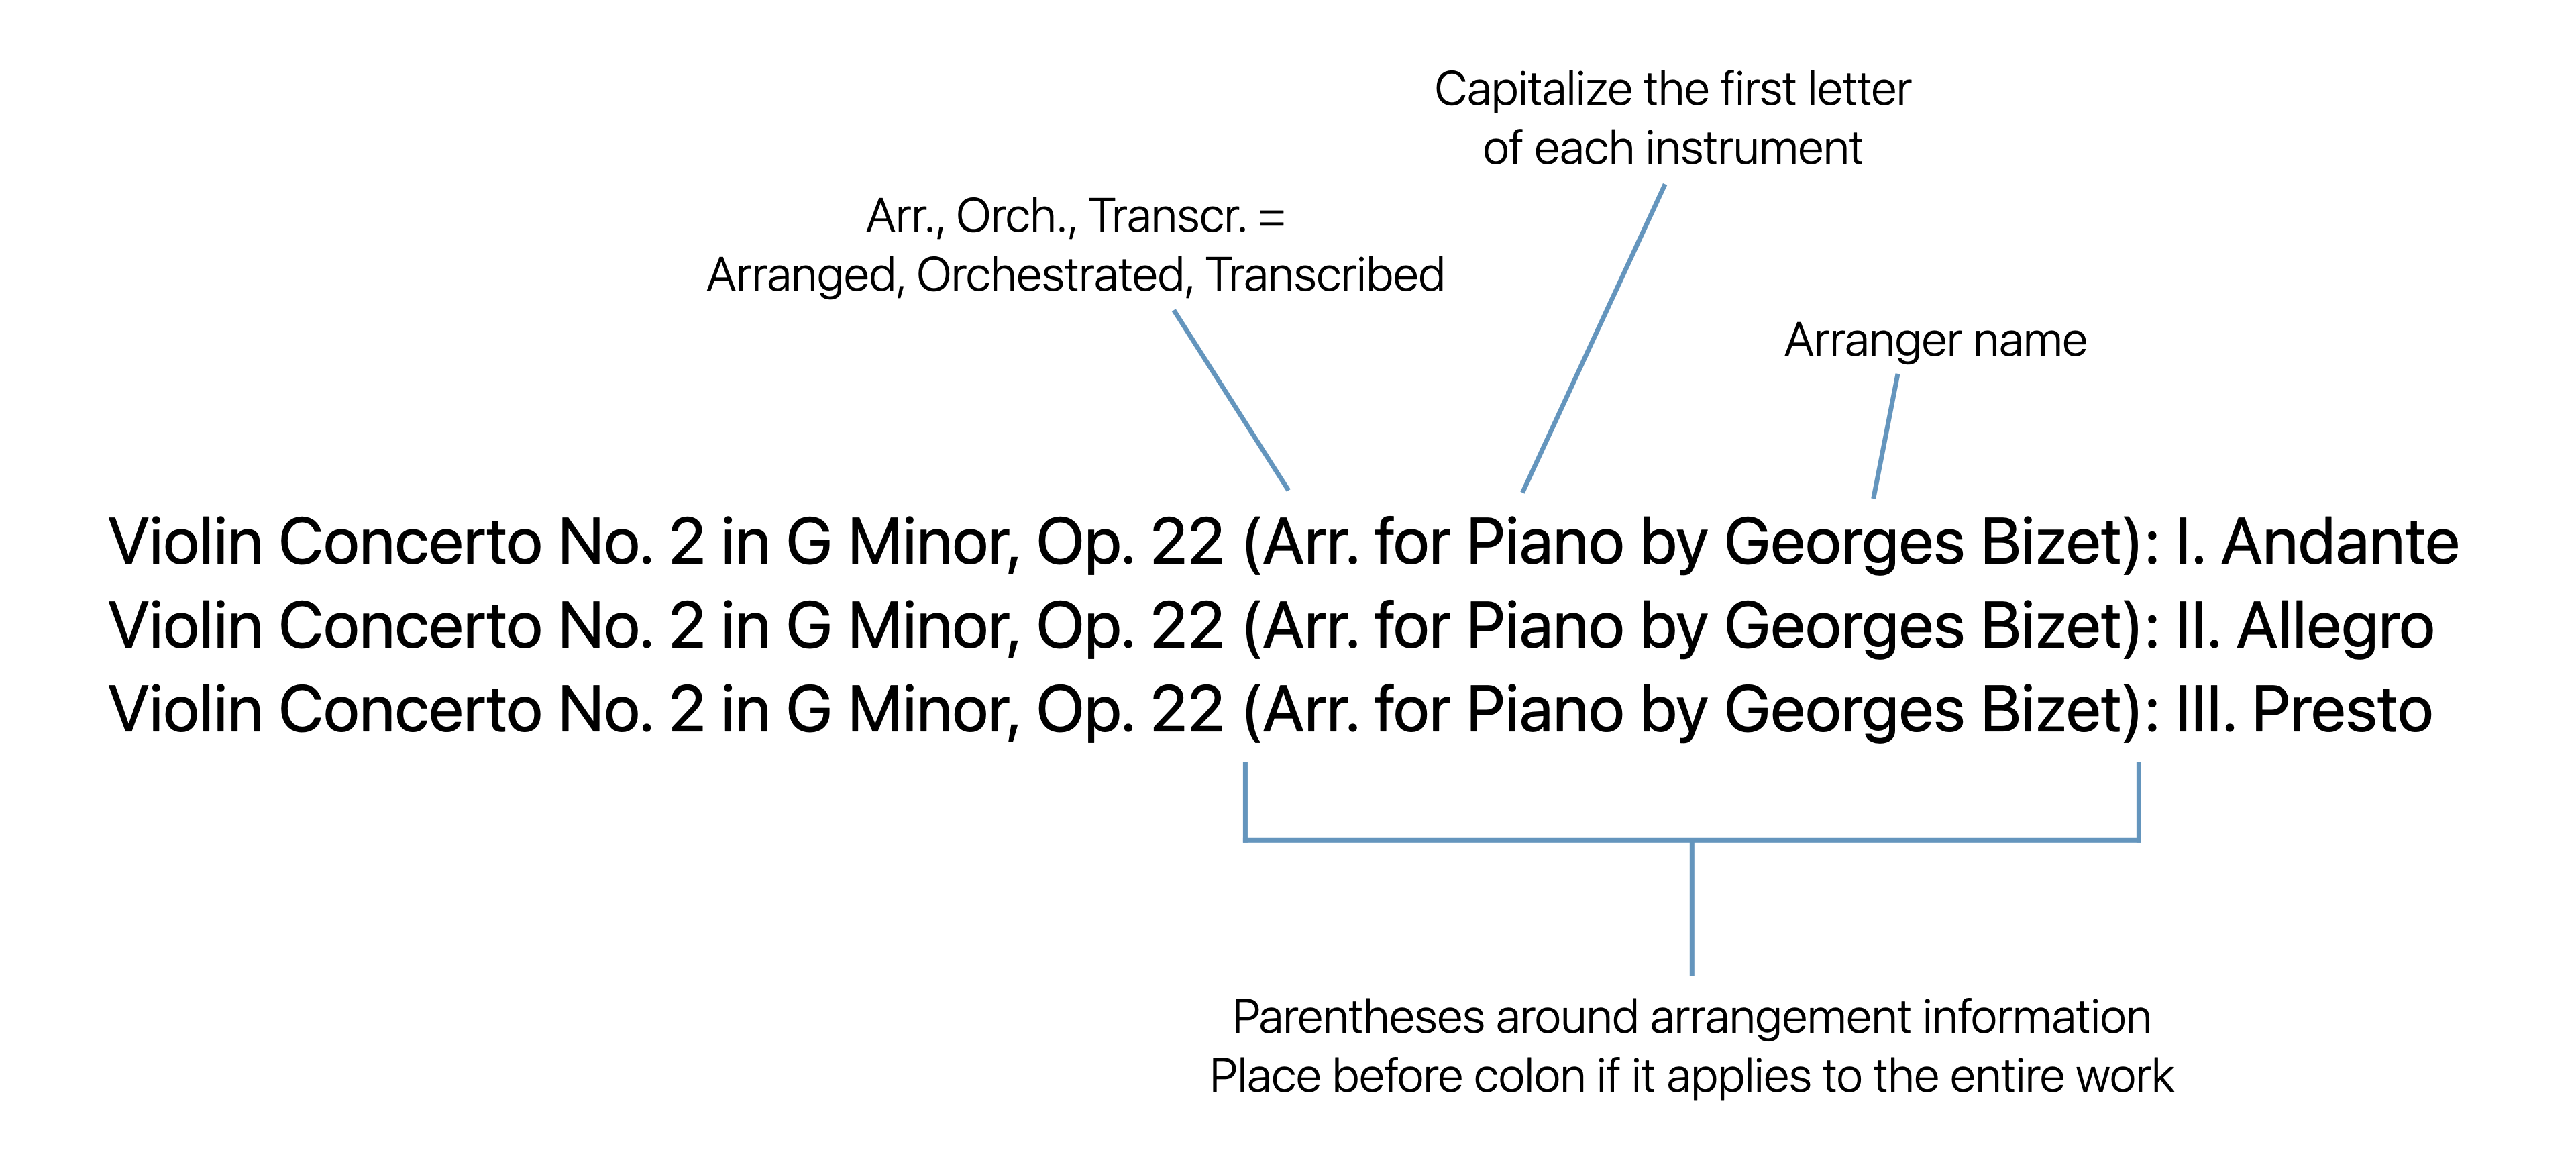 Example of formatting for versions, arragements, and transcriptions.